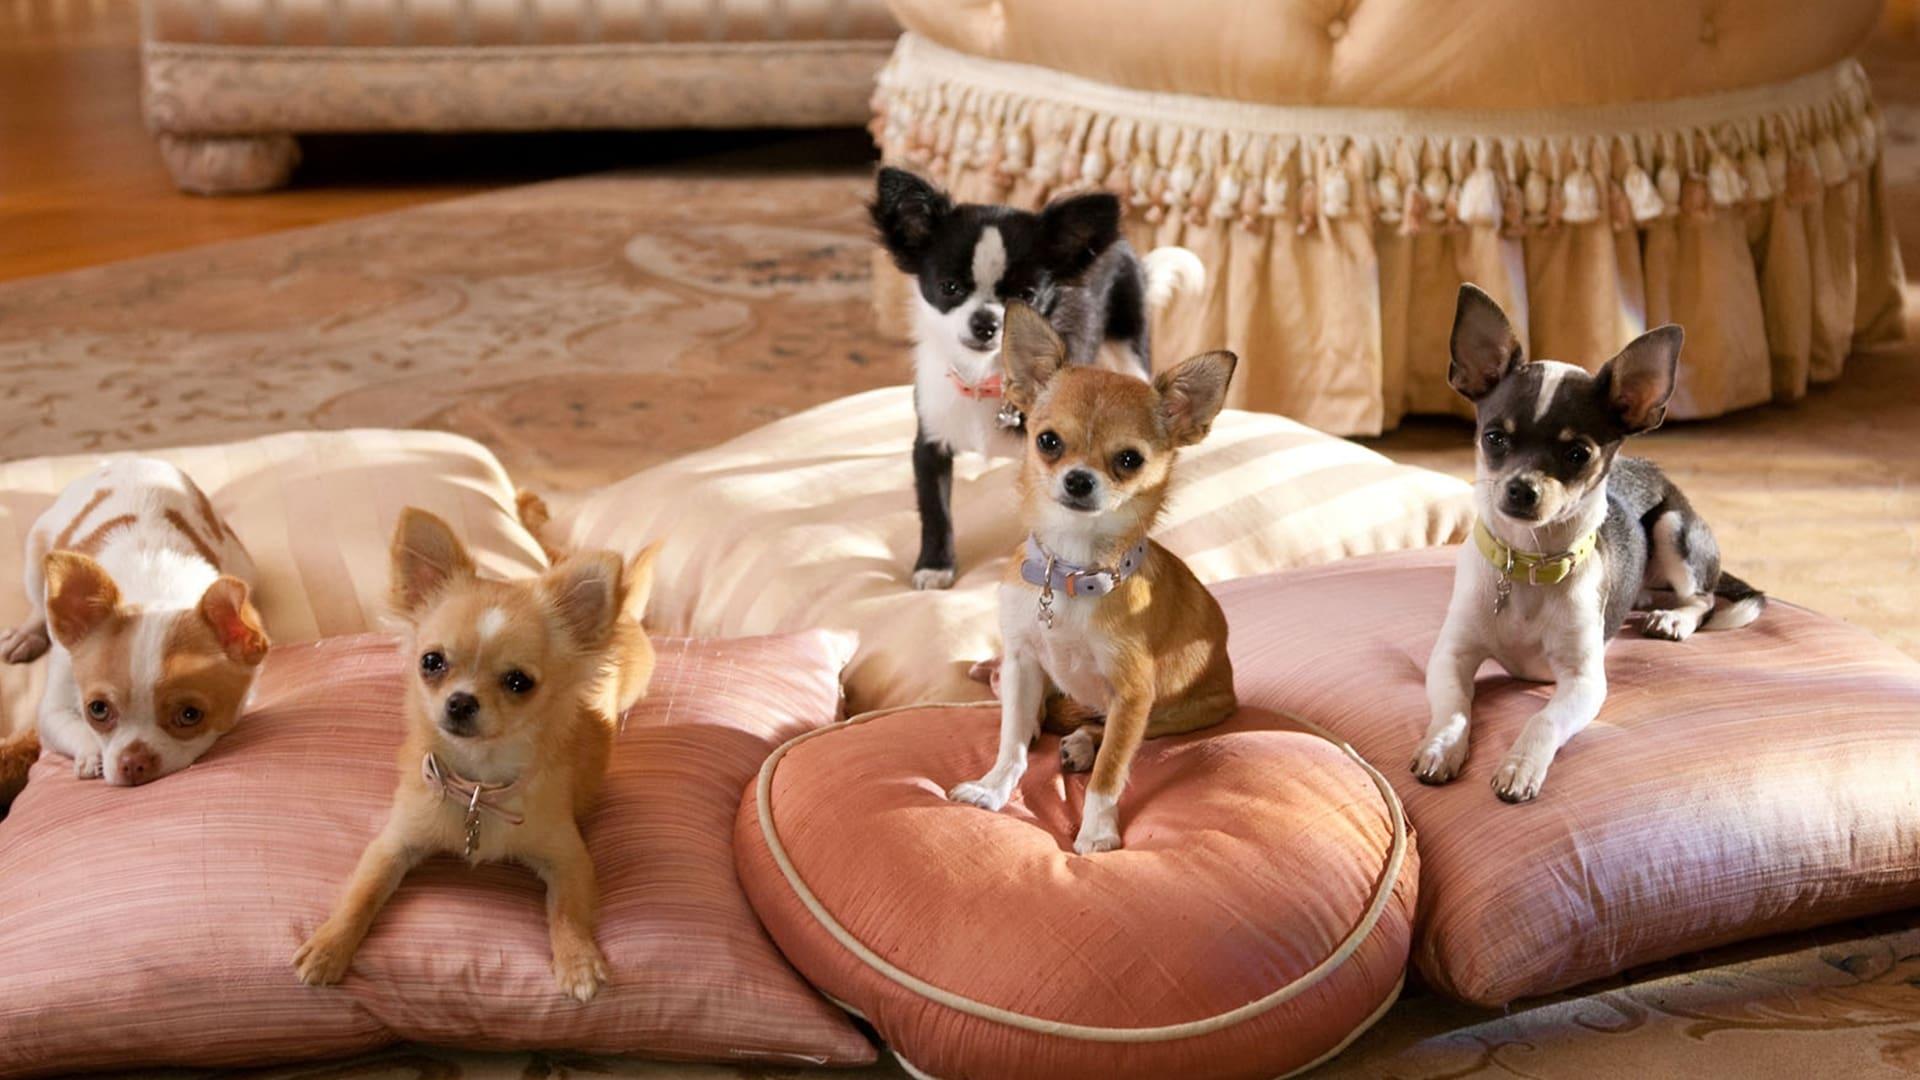 Beverly Hills Chihuahua 2 backdrop